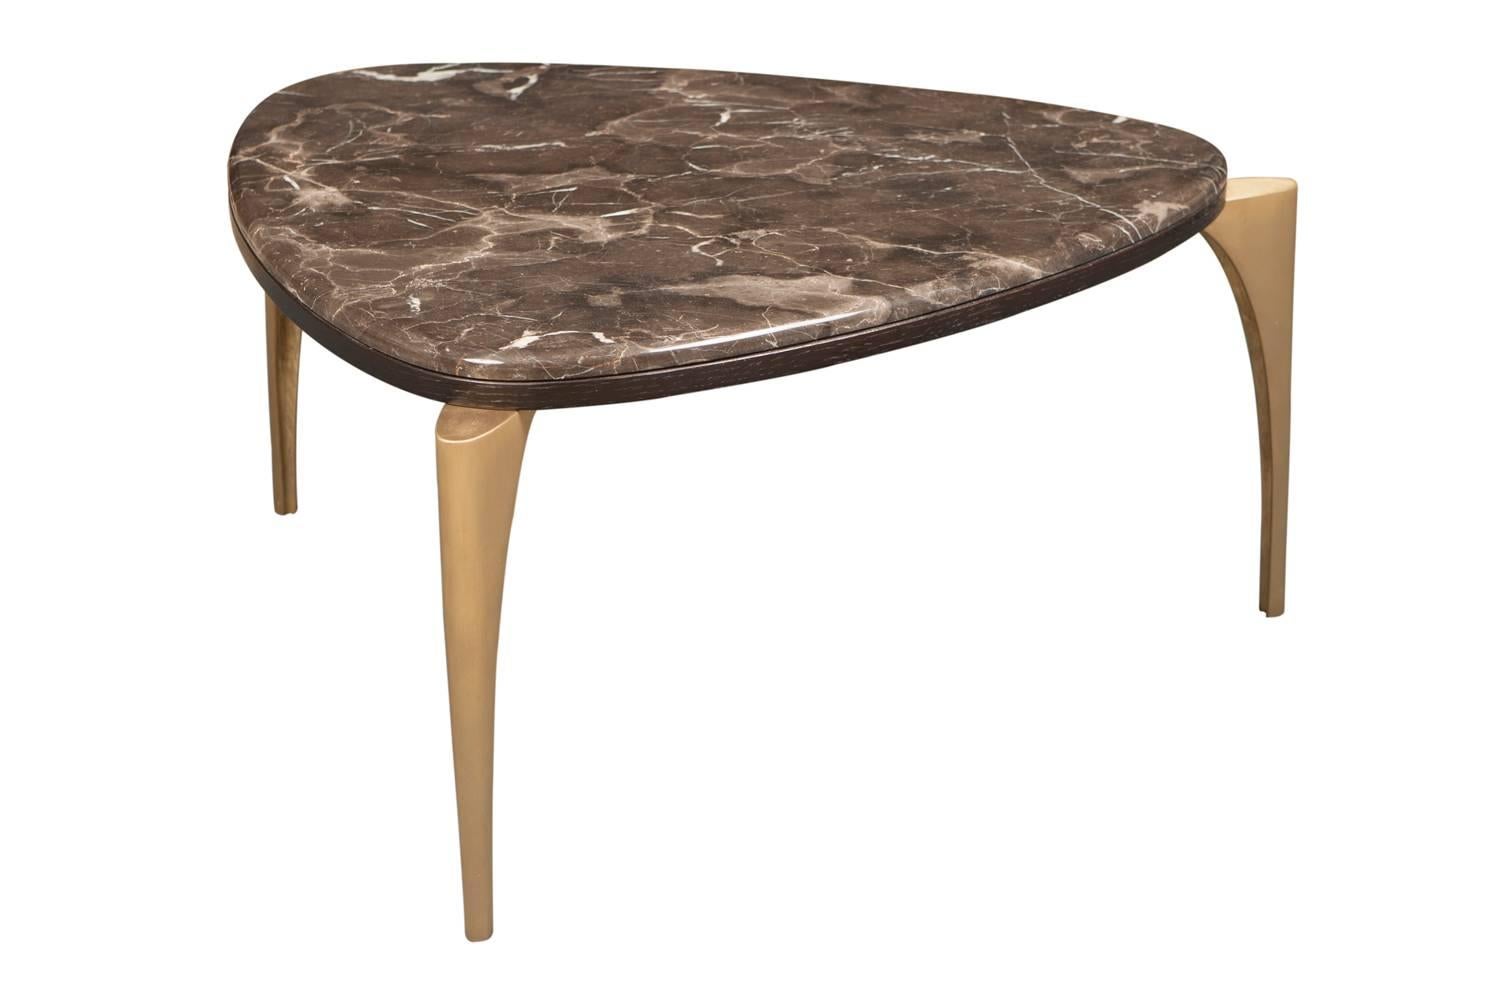 Very unique polished Emperador marble-topped cocktail table with unique cast brass or cast iron feet. 

Standard size: 
W 90cm
D 90cm
H 42cm